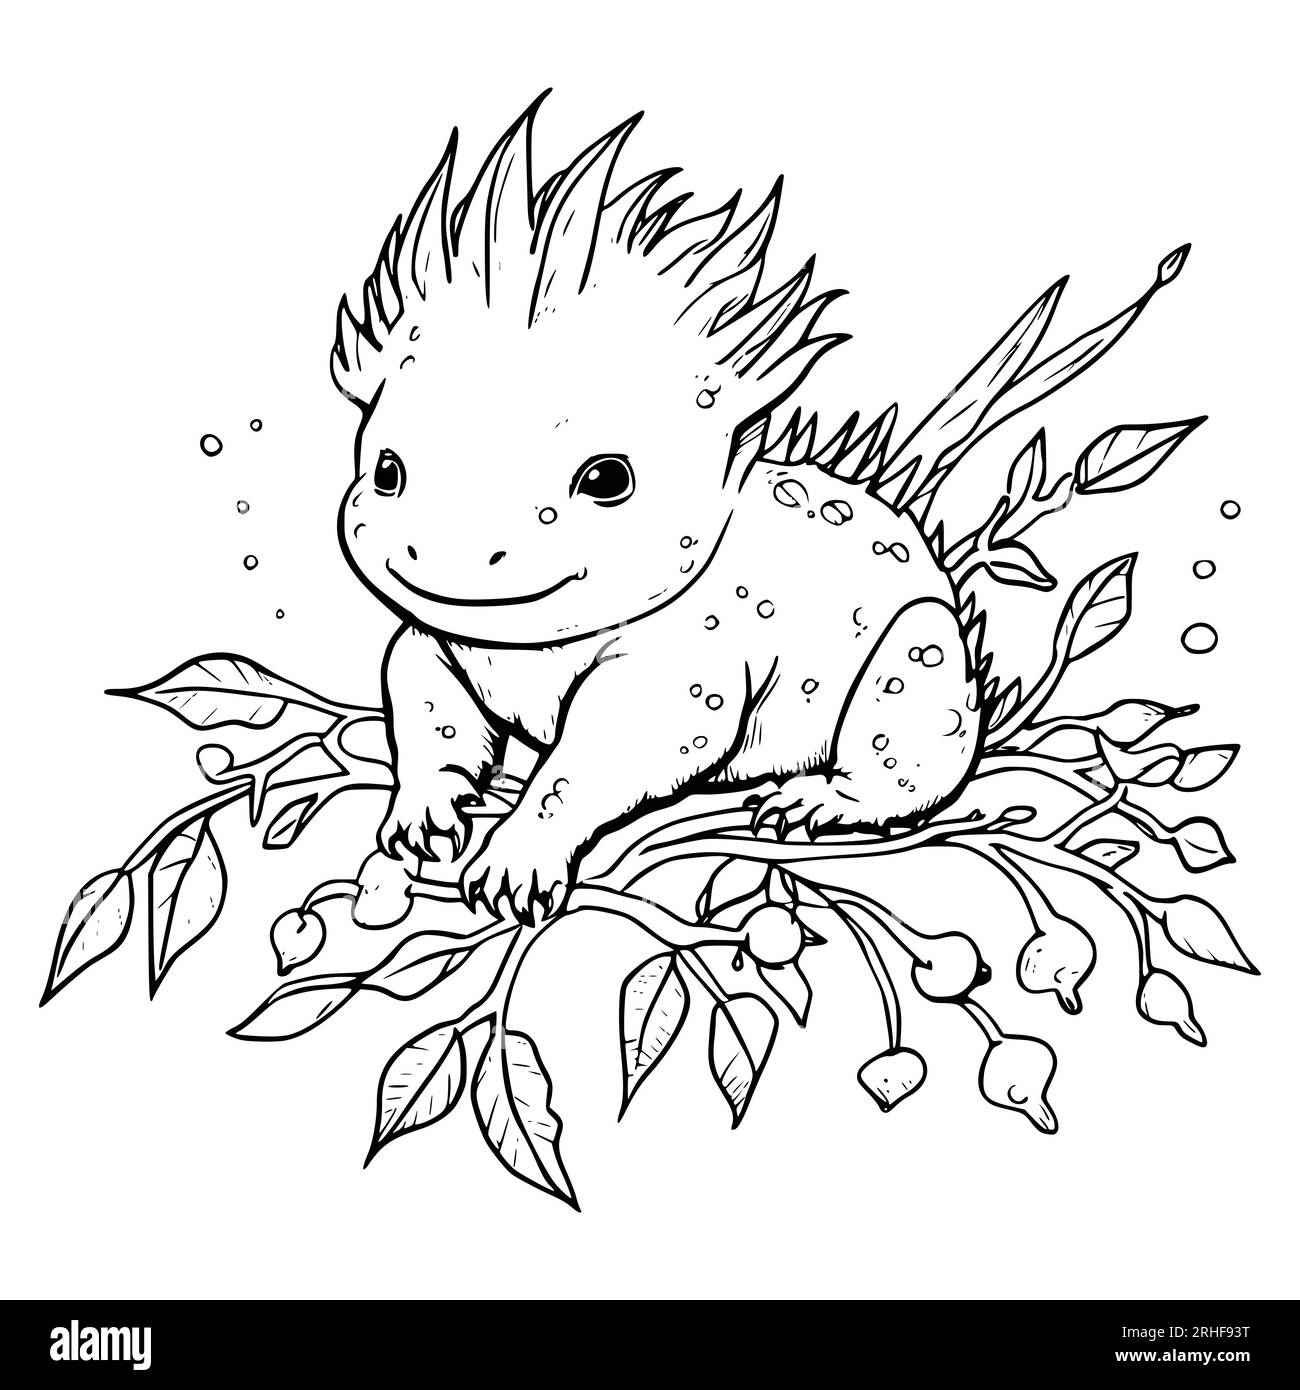 Axolotl Coloring Page Drawing For Kids Stock Vector